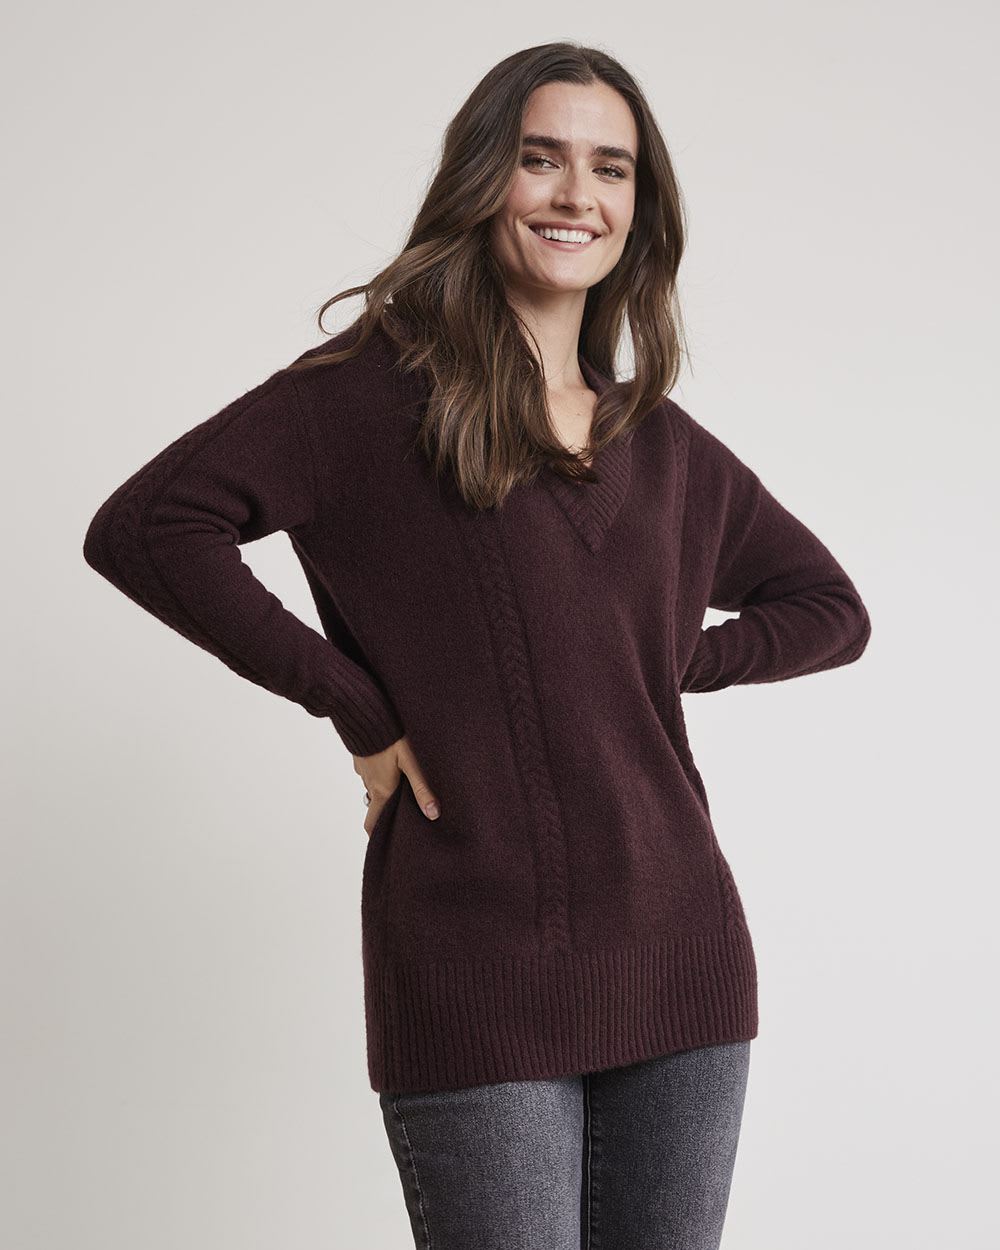 Merino-Blend V-Neck Tunic with Cable Stitches